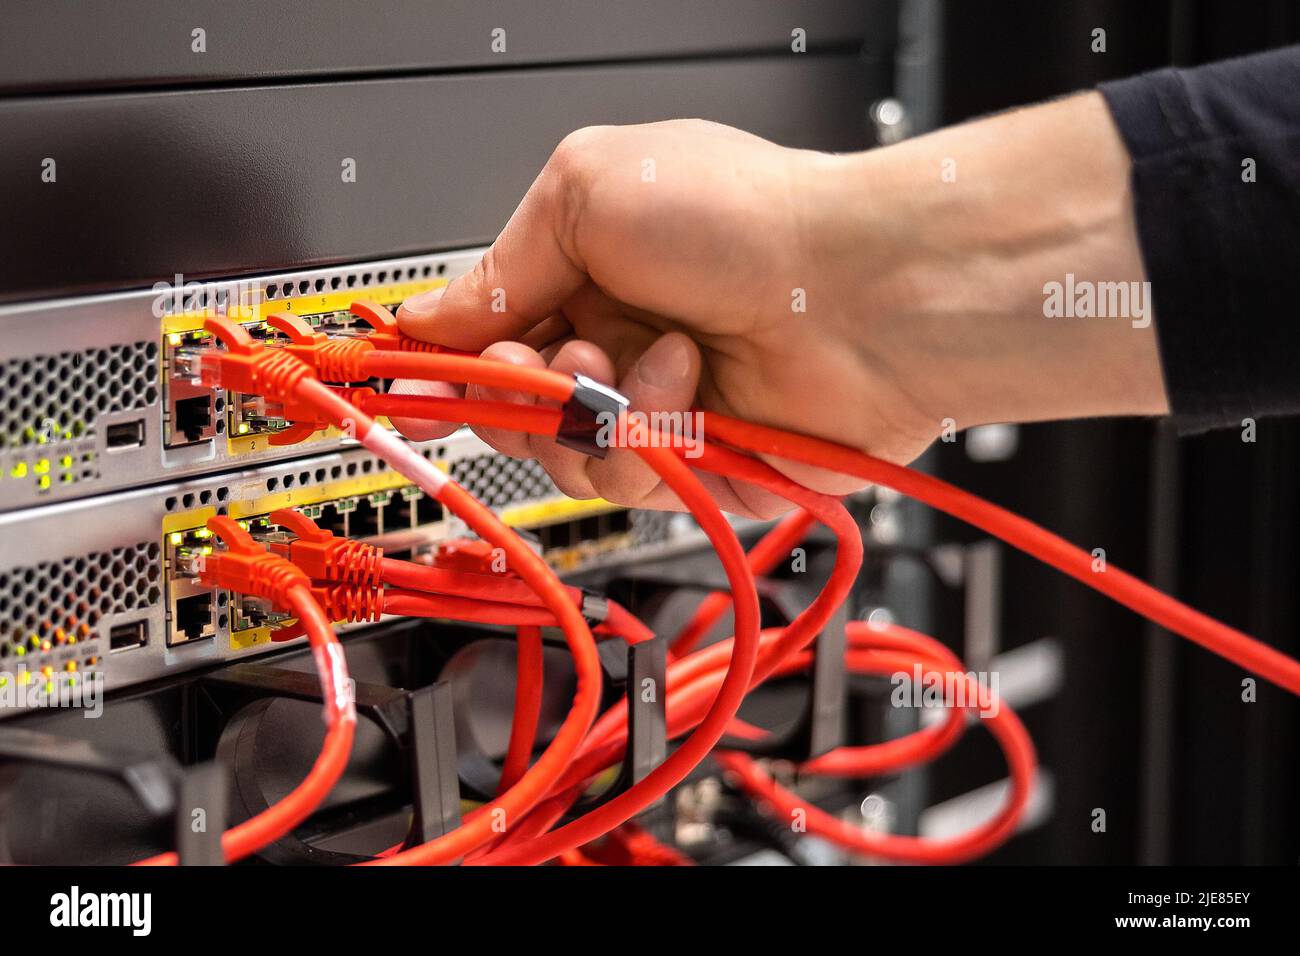 Close-up of Male Technician Plugging Cable In San Stock Photo